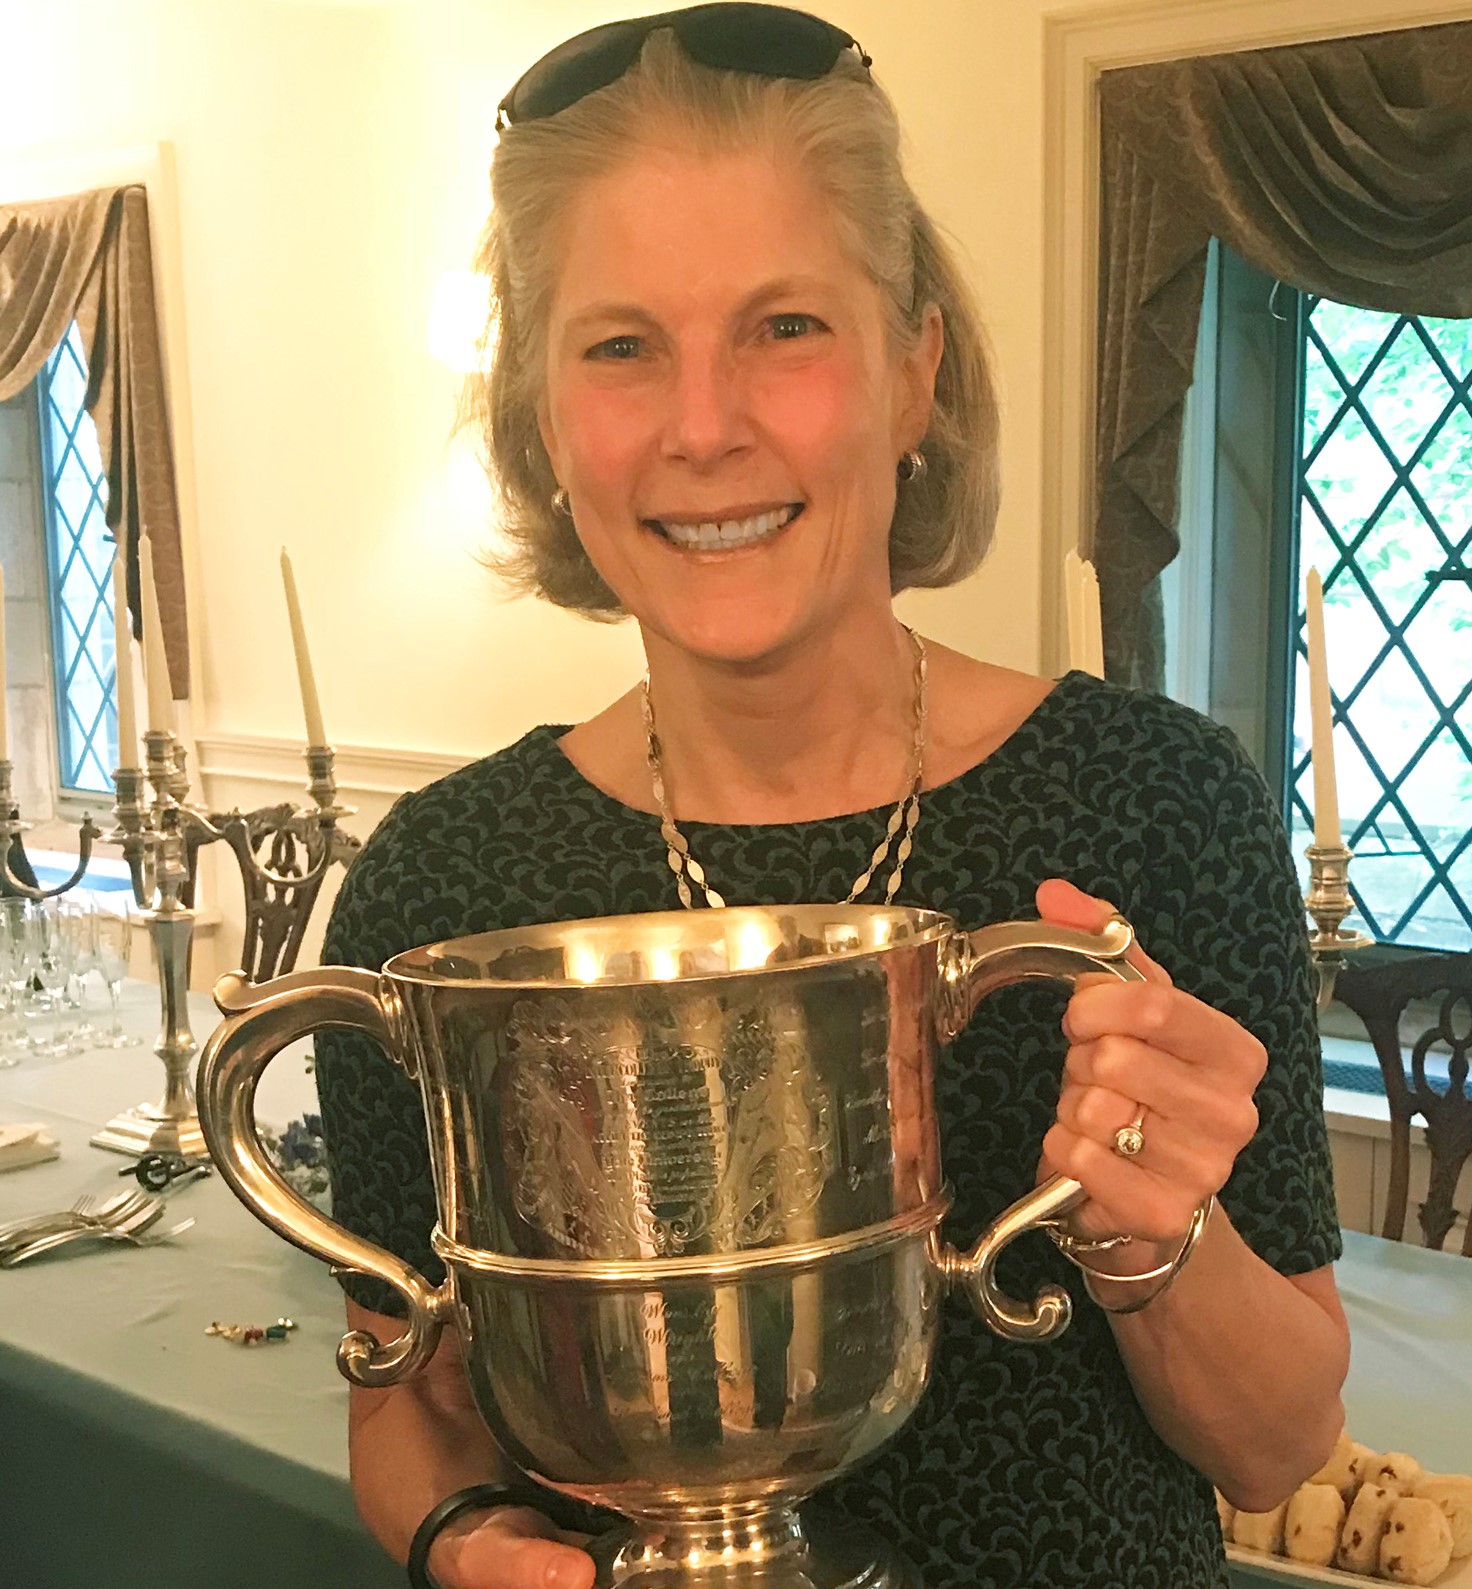 Andrea DaRif '73 last semester holding the Tyng Cup intramural trophy, at Saybrook College